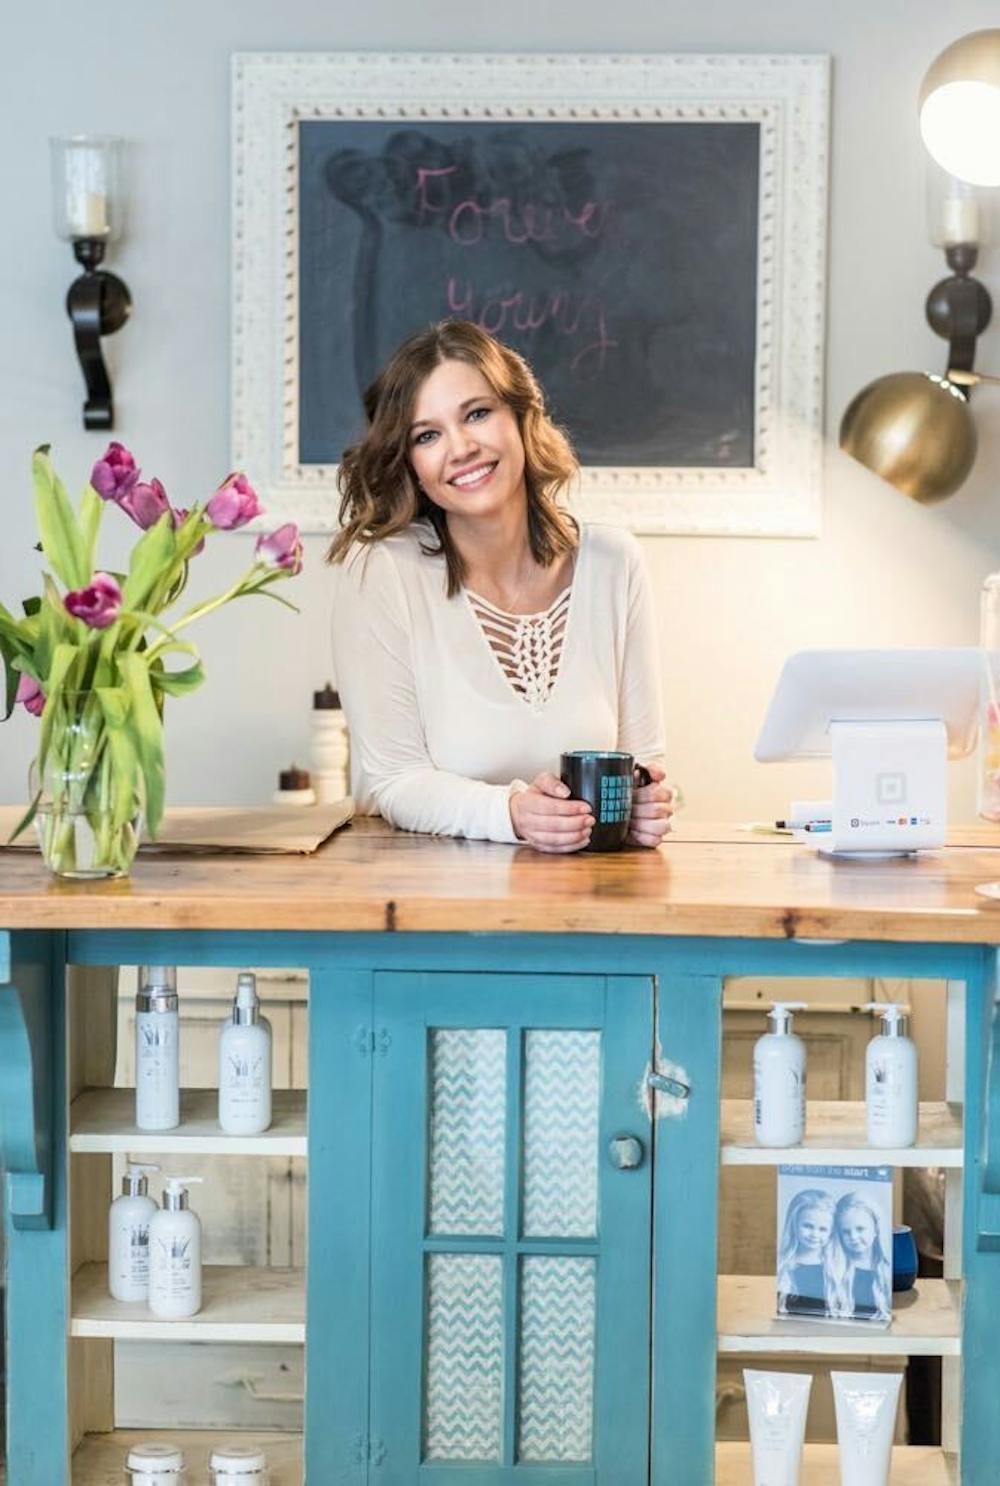 Amanda Hughes, owner of Forever Young, poses at her checkout desk. Hughes had five years of retail experience prior to opening her own boutique. Kishel Photography, Photo Courtesy